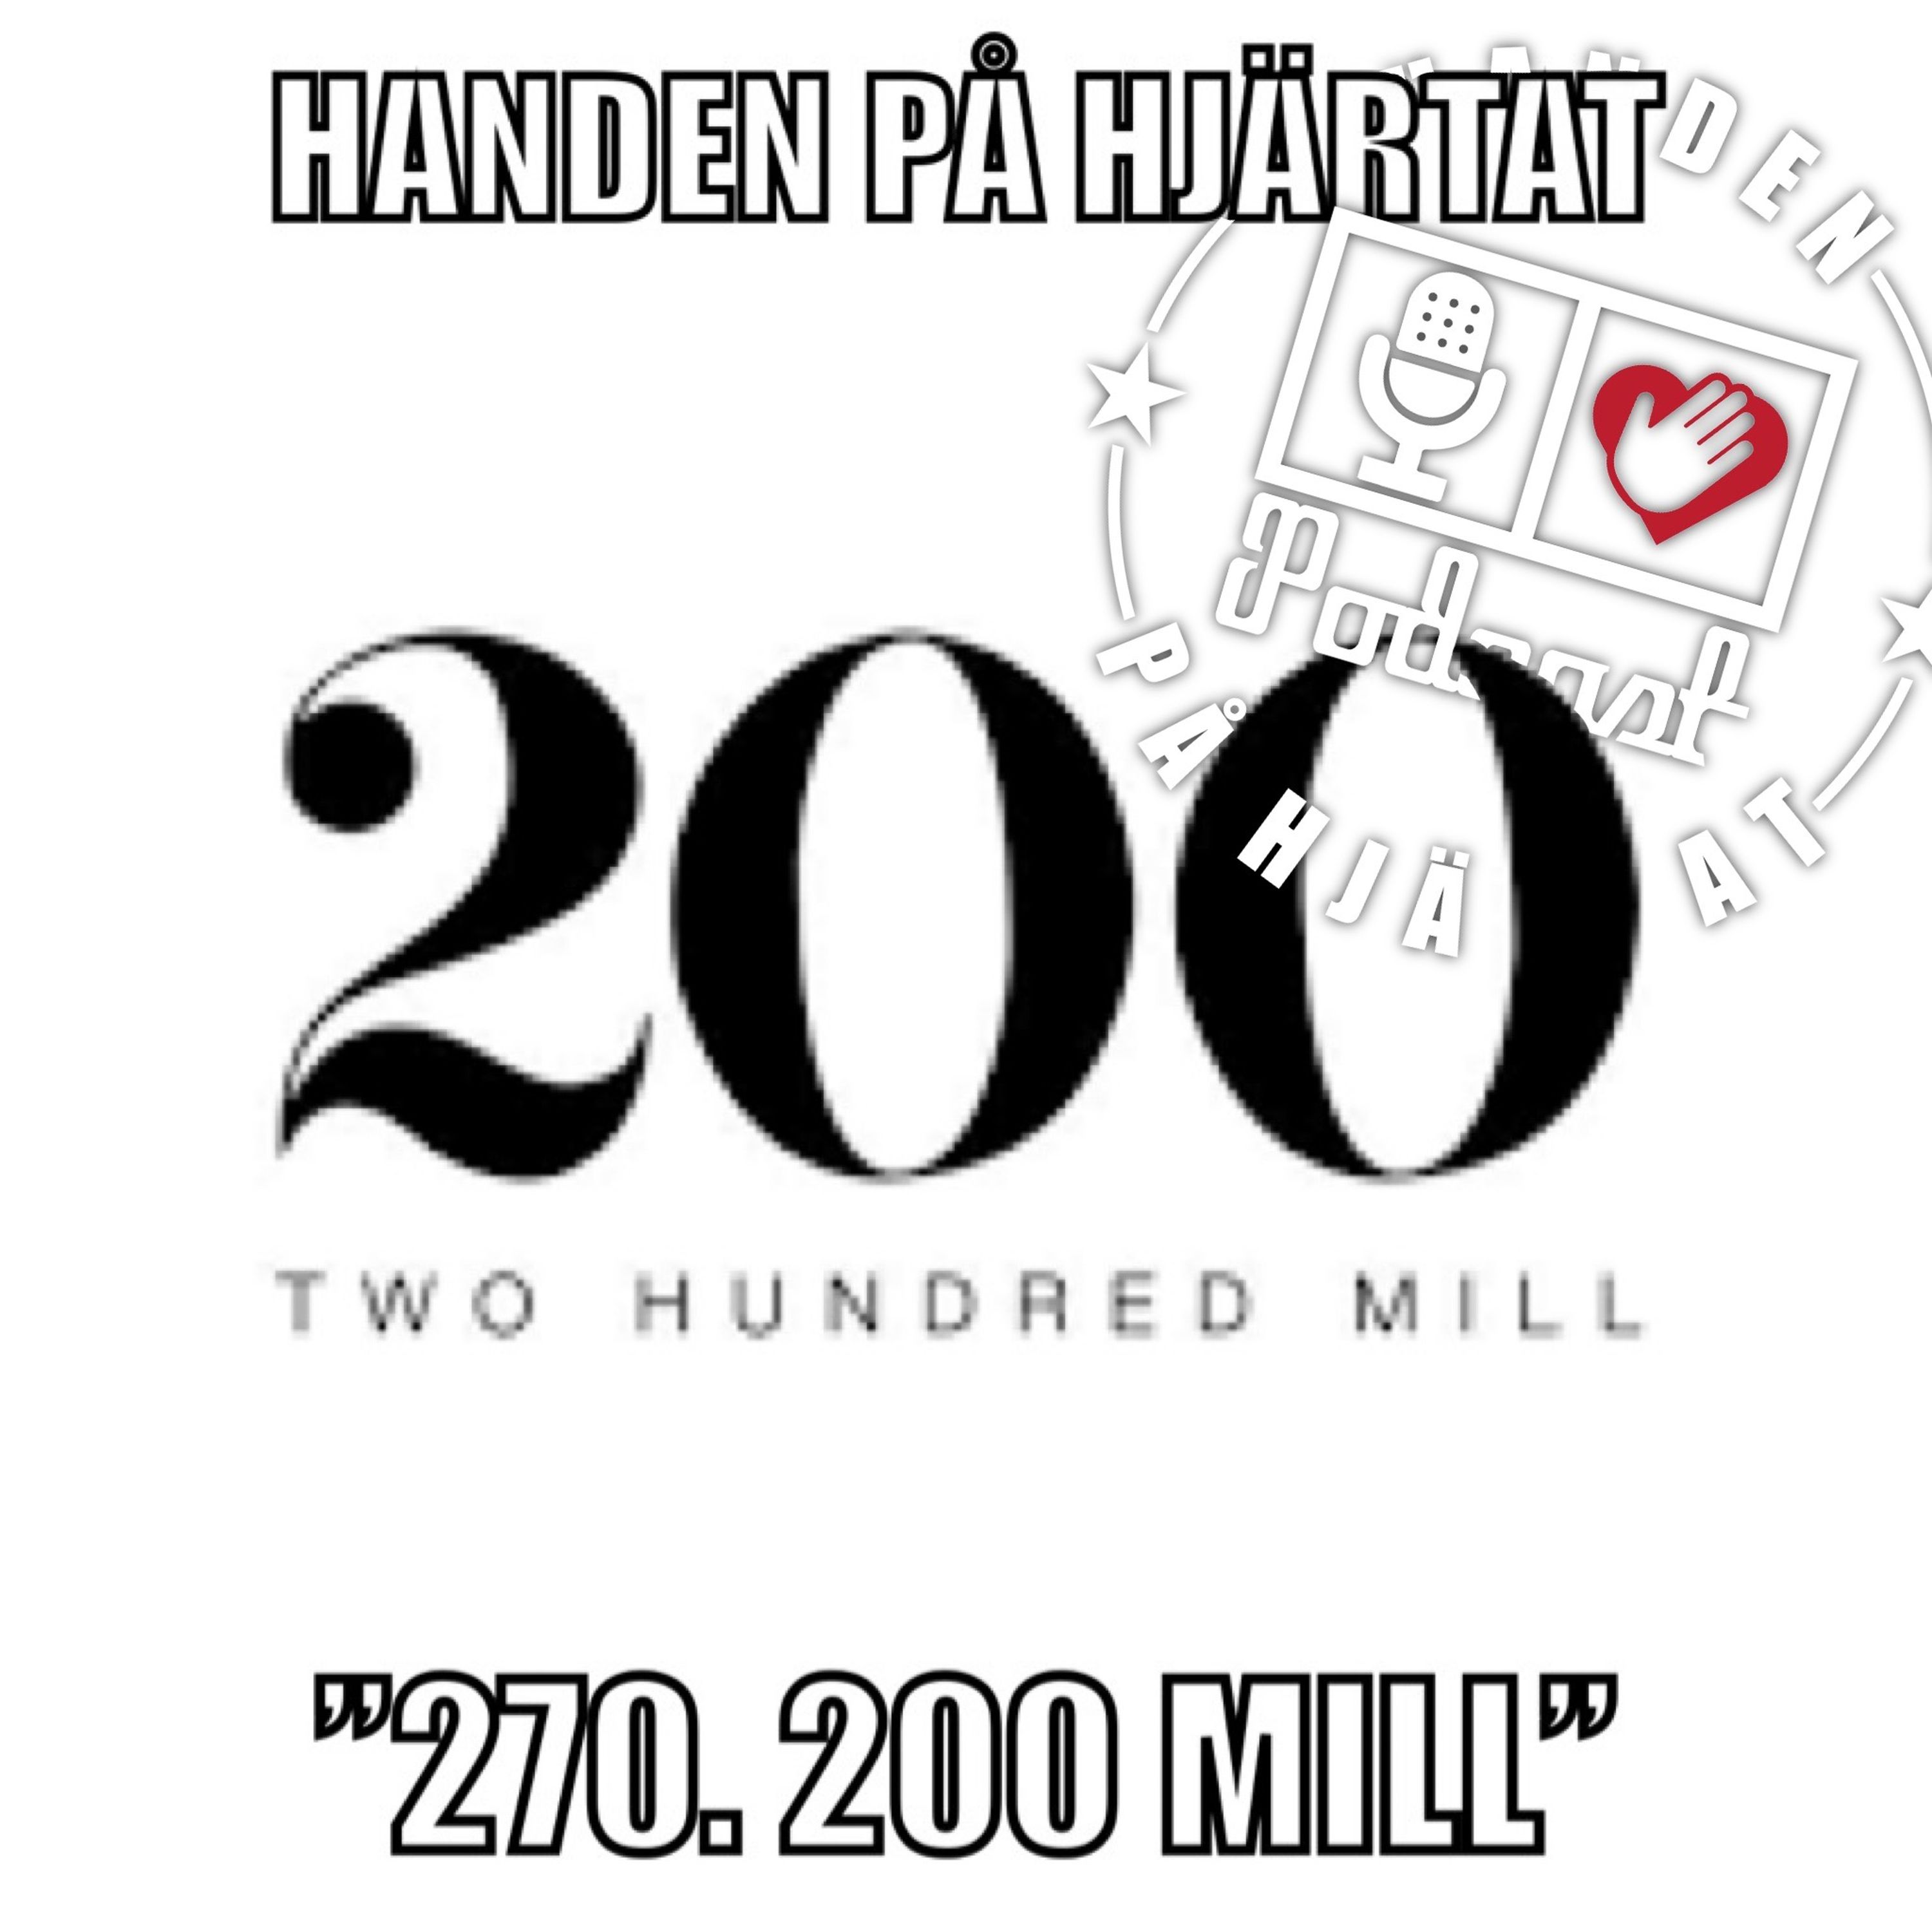 ”270. 200 MILLE”